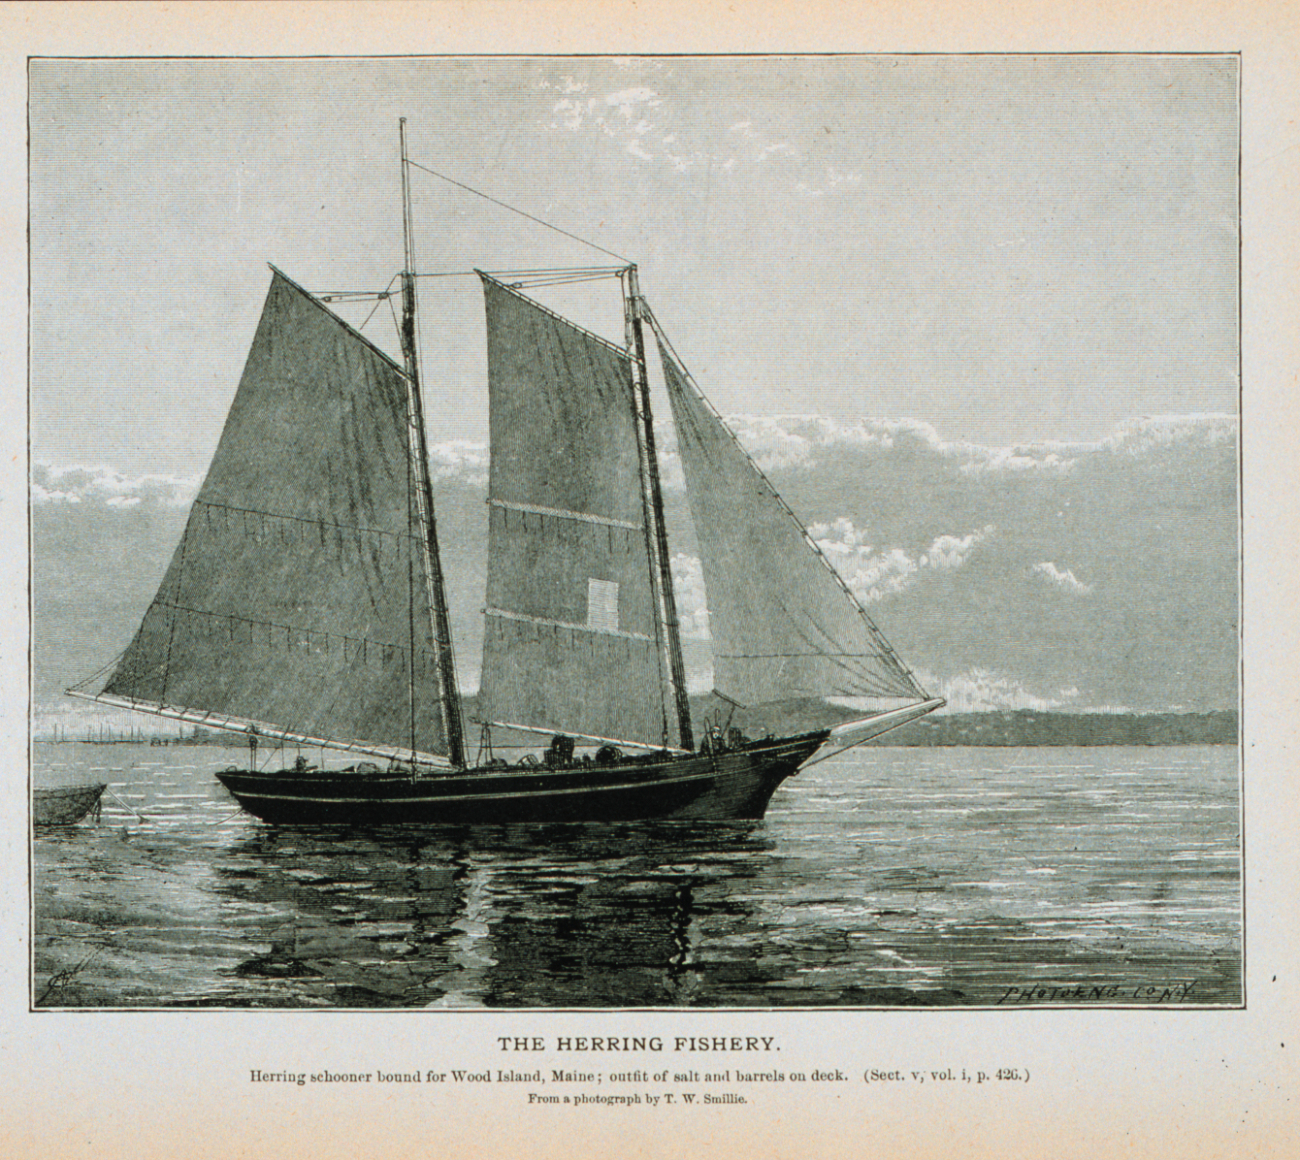 Herring schooner bound for Wood Island, MaineOutfit of salt and barrels on deckFrom a photograph by T